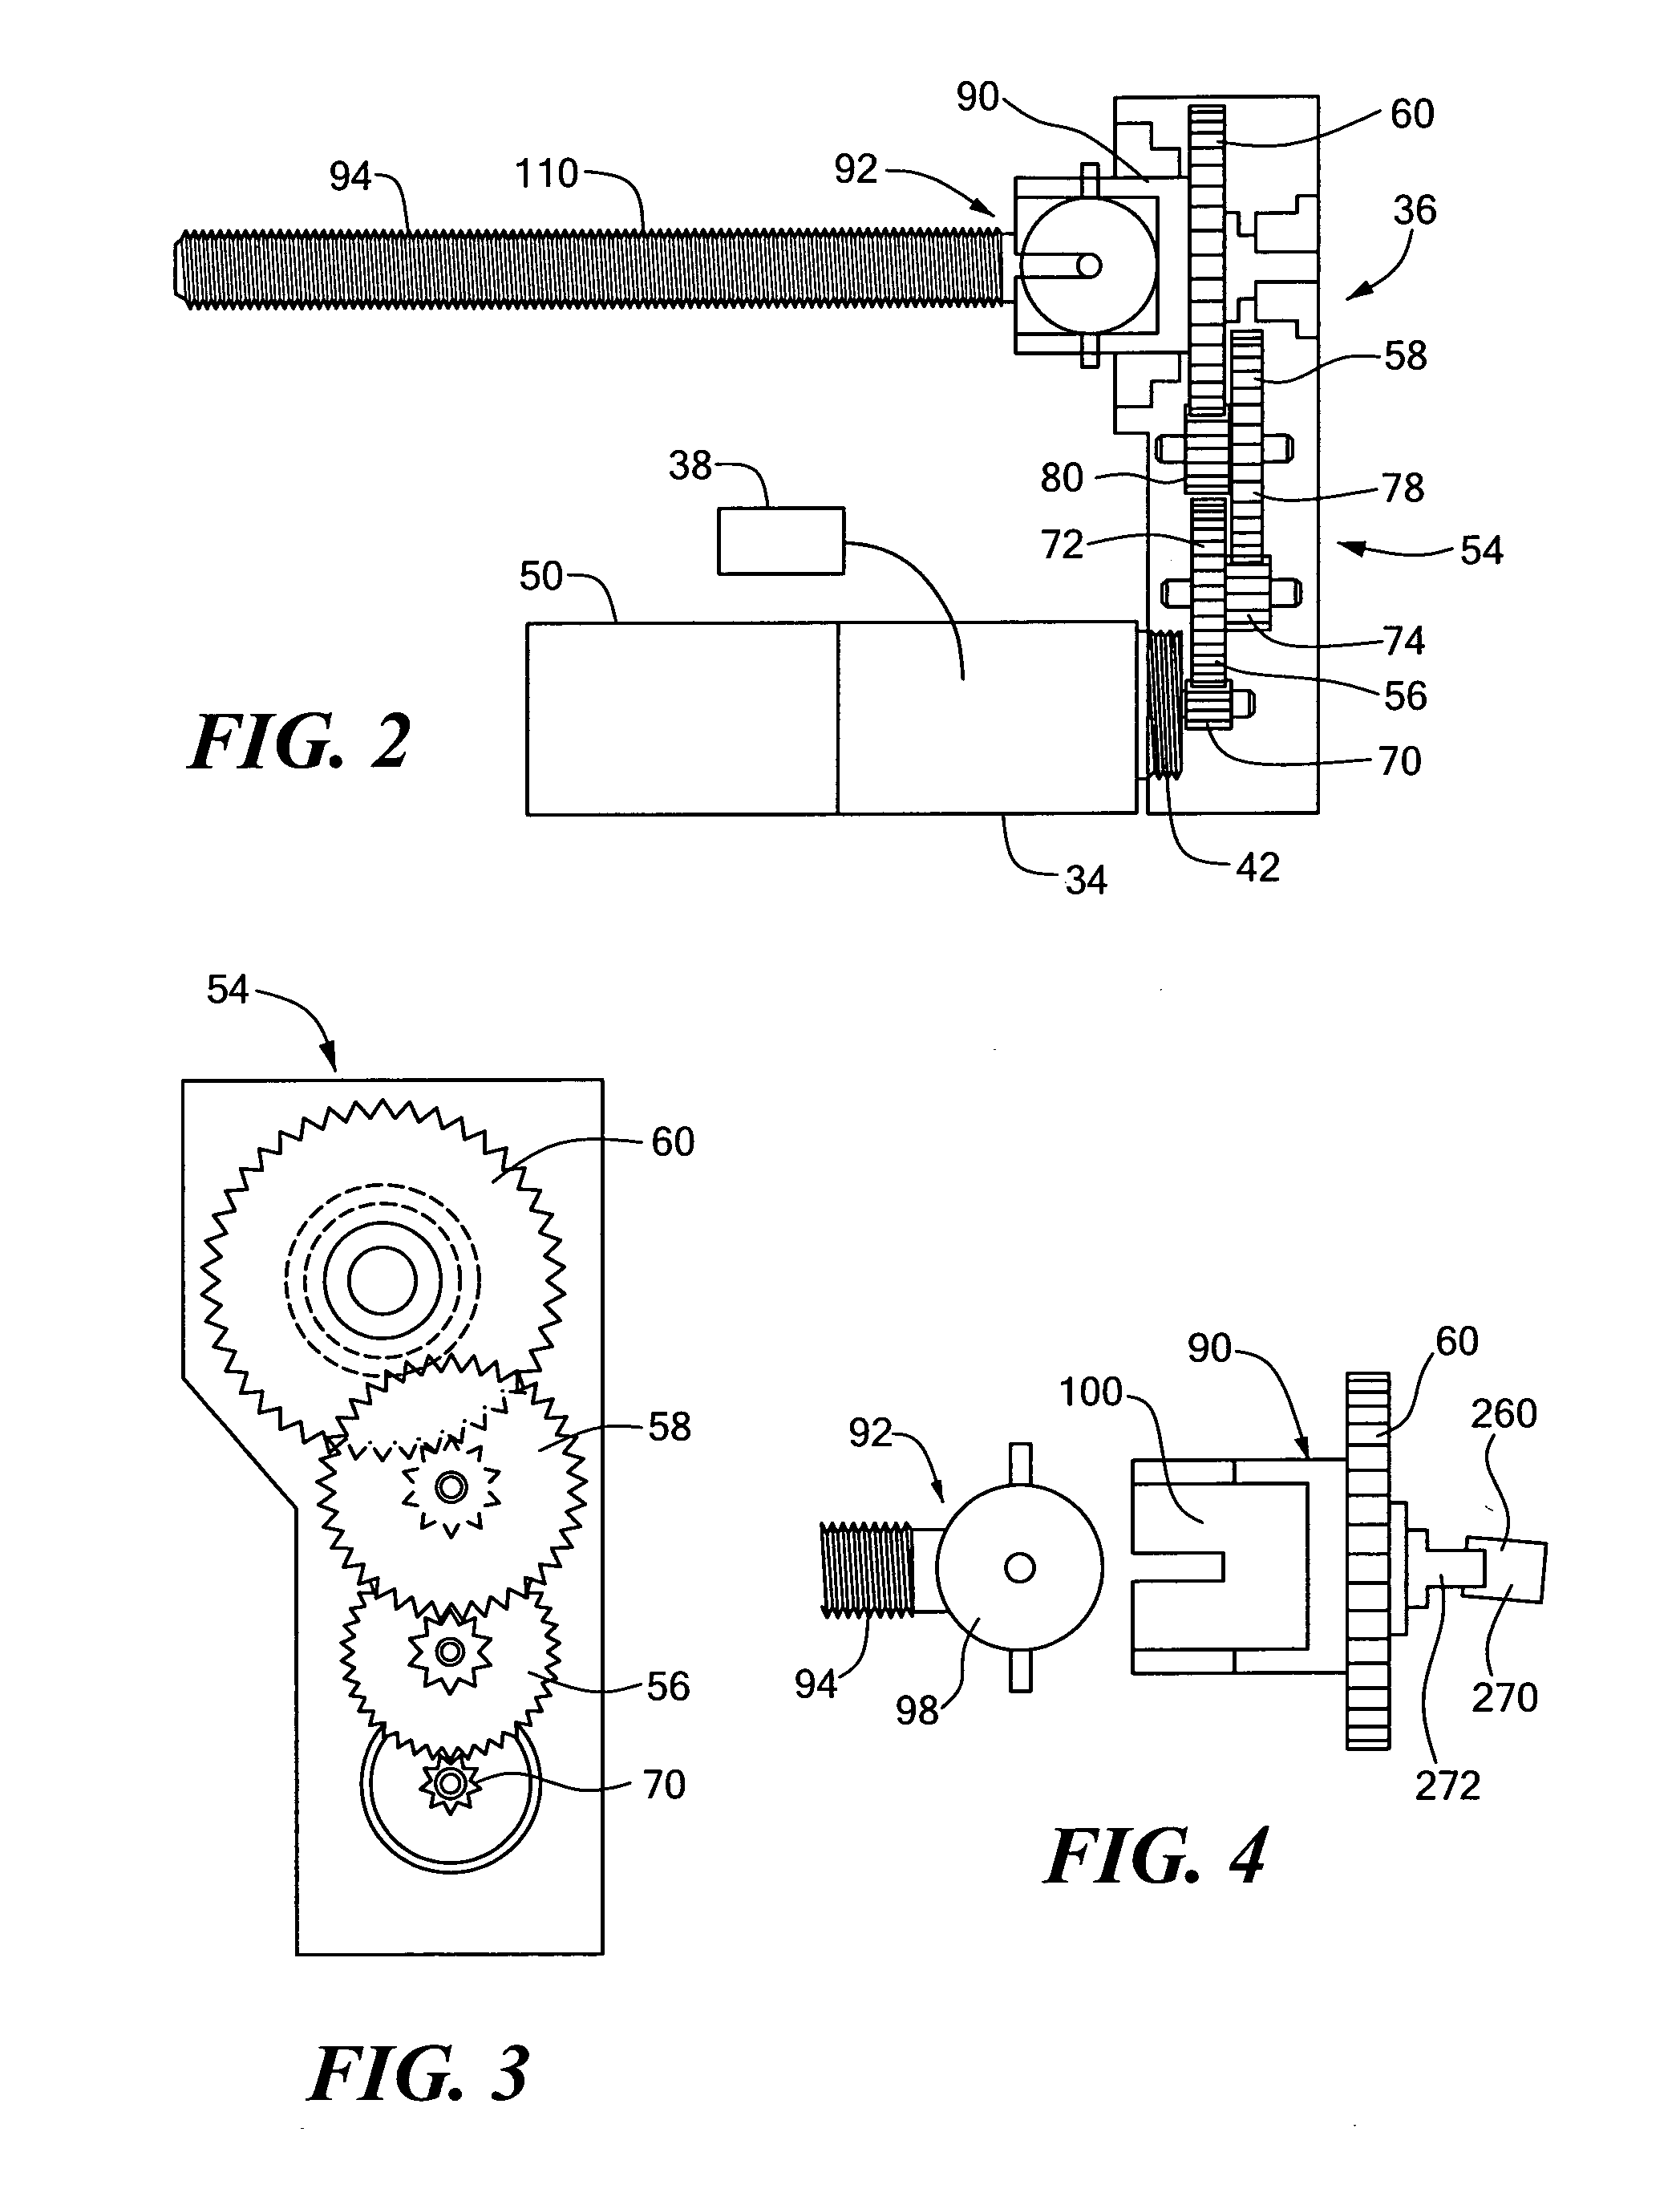 Coupling system for an infusion pump